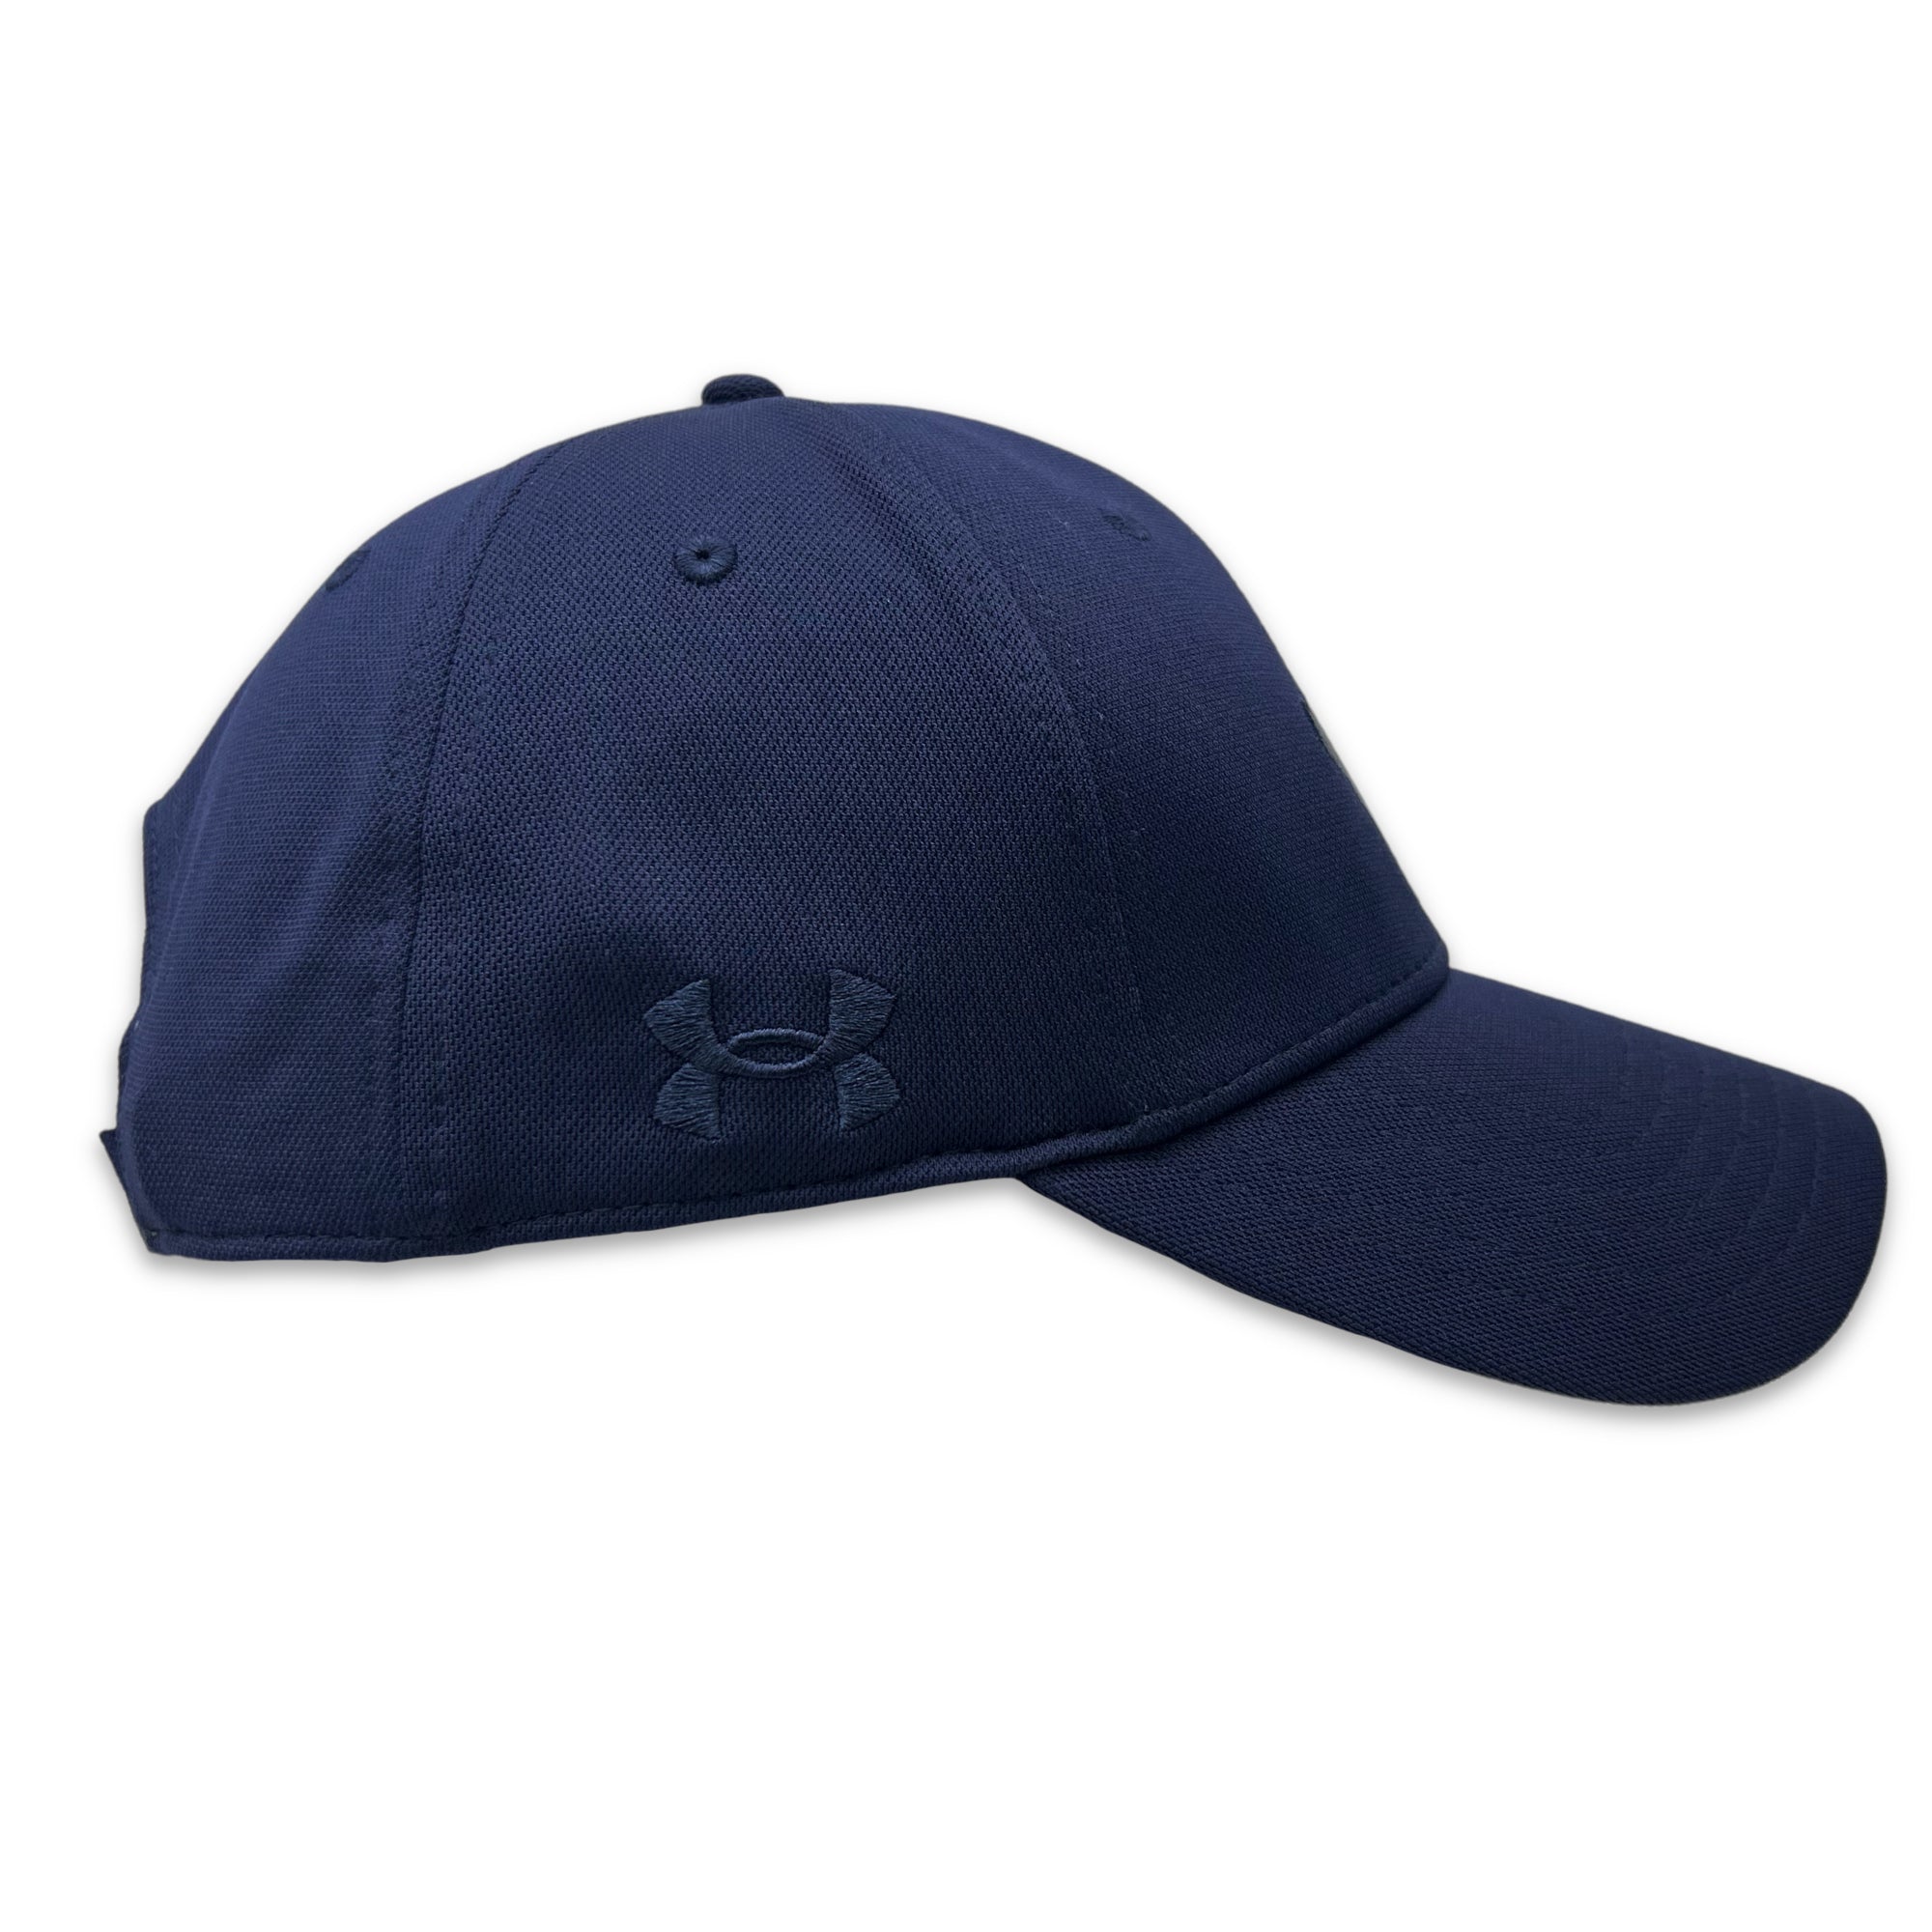 Under armour Baseball Caps Adjustable Hats for Men for sale